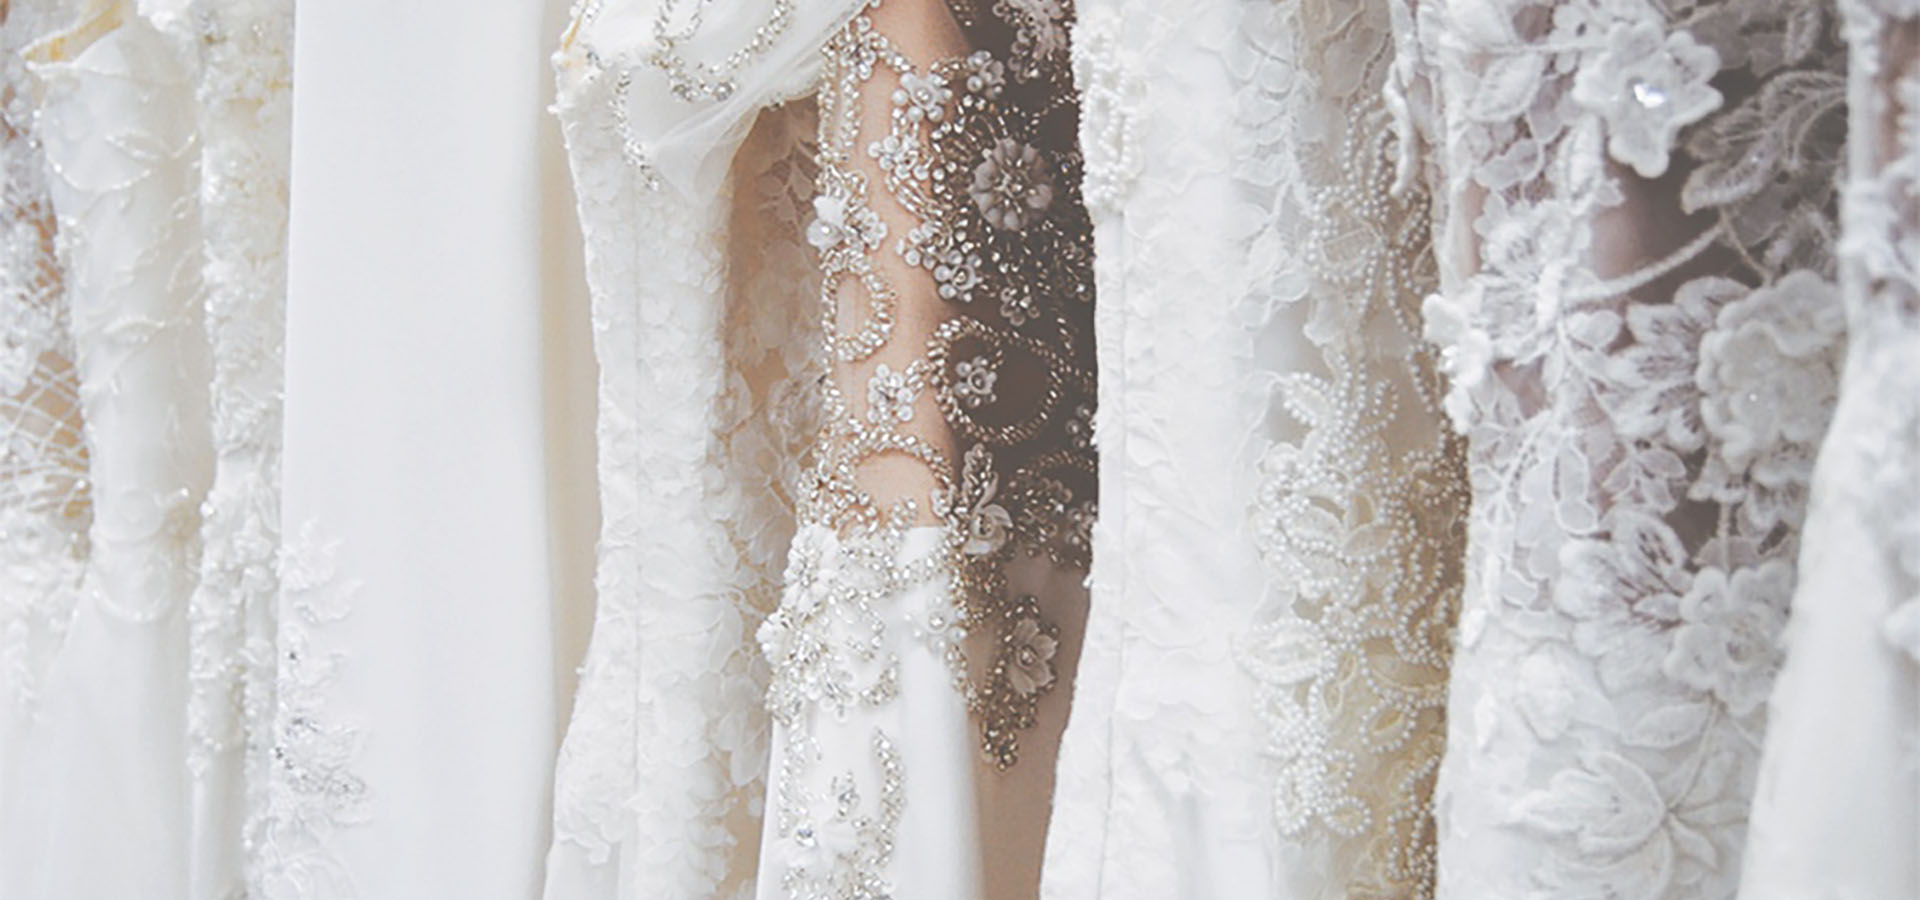 10 Things No One Tells You About Wedding Dress Shopping